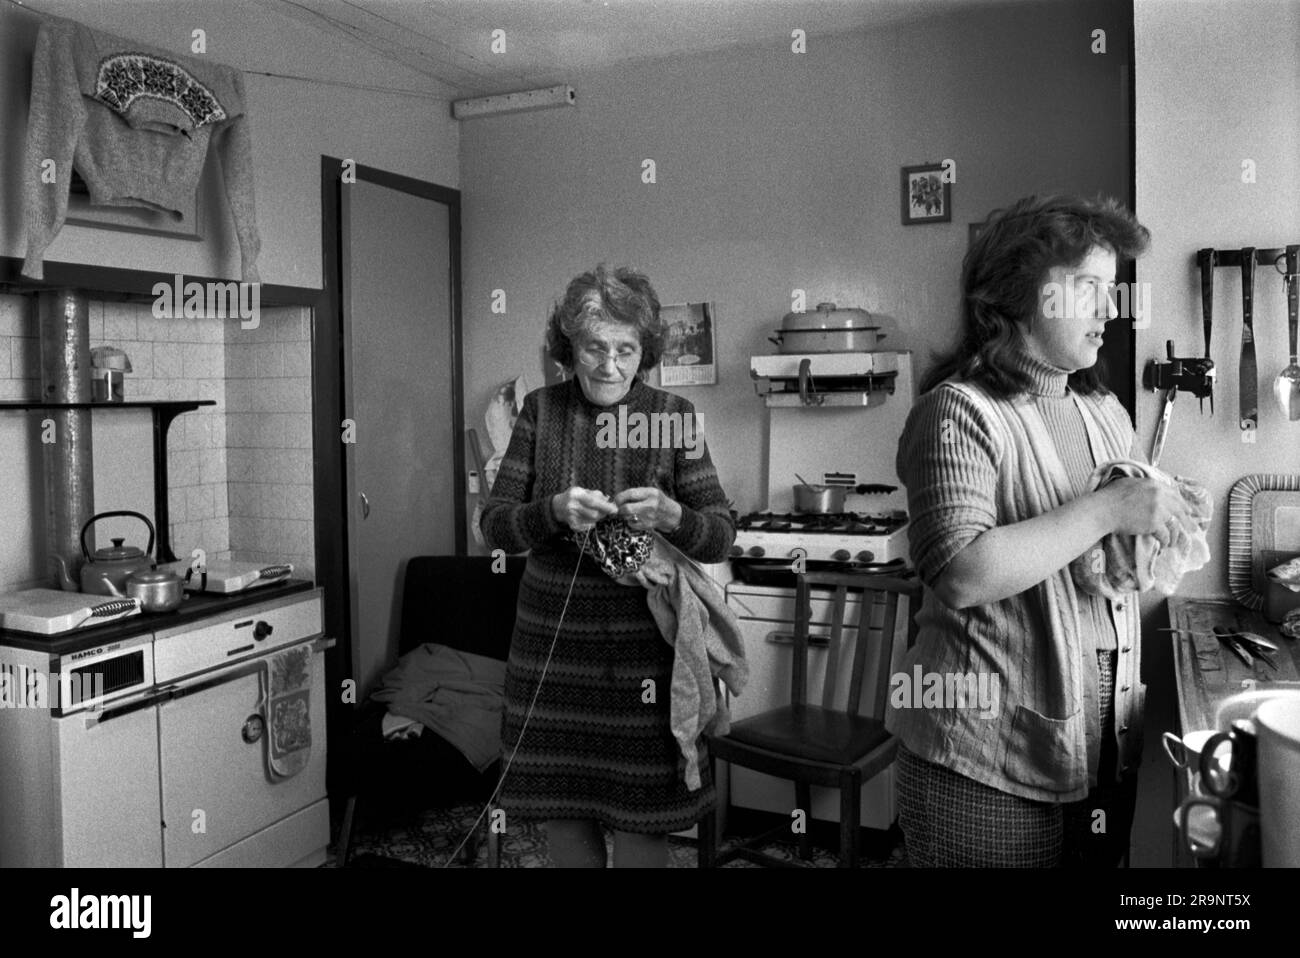 Knitting a Fair Isle Jumper. A crofting family, mother and daughter in their kitchen. The older woman is knitting a Fair Isle jumper, one has been washed and is hung up to dry over the stove, before being sold through a local shop. Shetlands Mainland, Shetland Islands, Scotland, circa 1979. UK 1970S HOMER SYKES Stock Photo